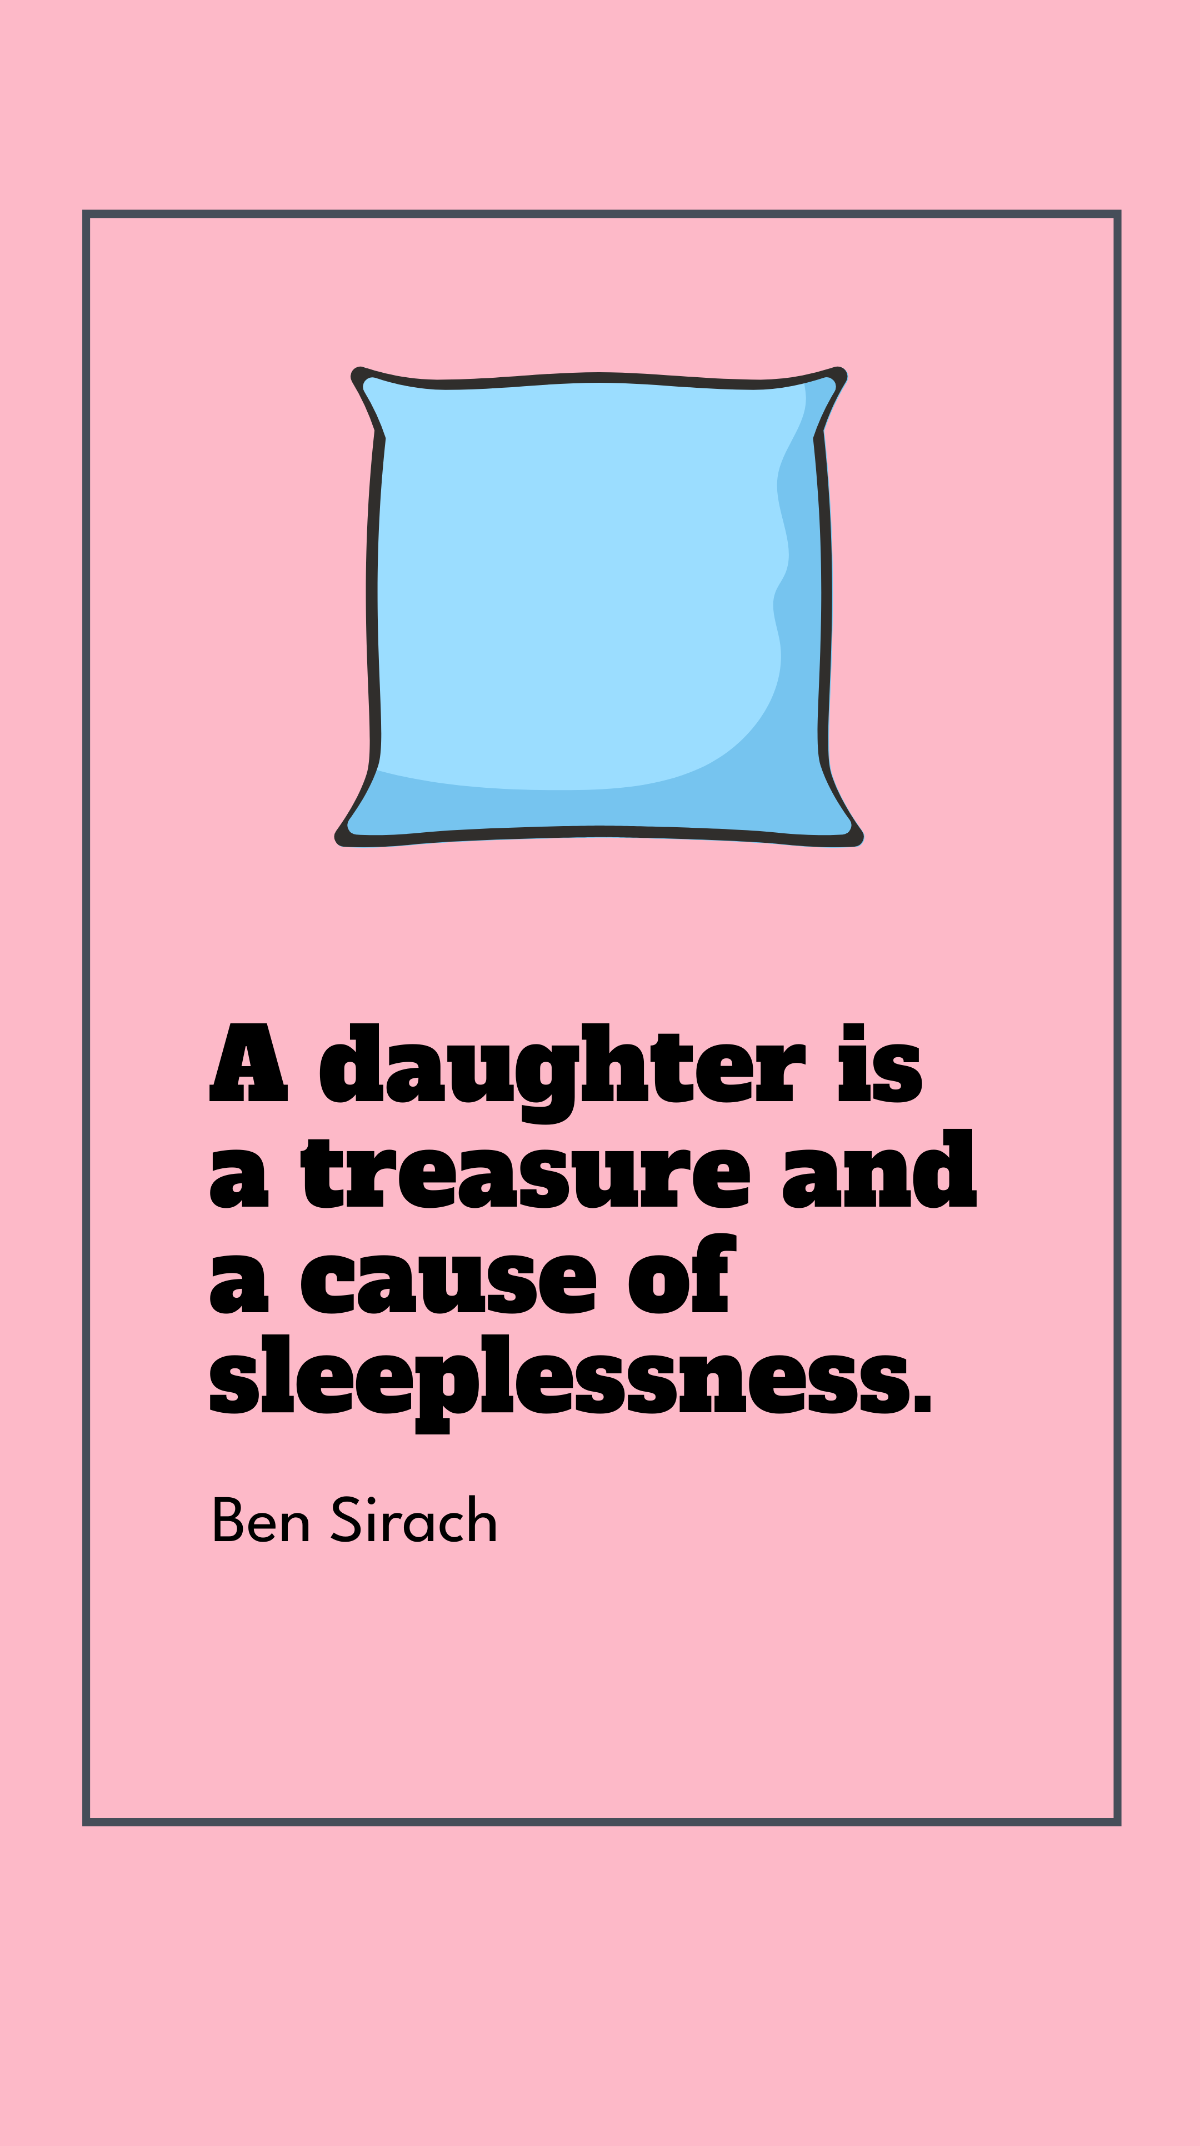 Ben Sirach - A daughter is a treasure and a cause of sleeplessness.